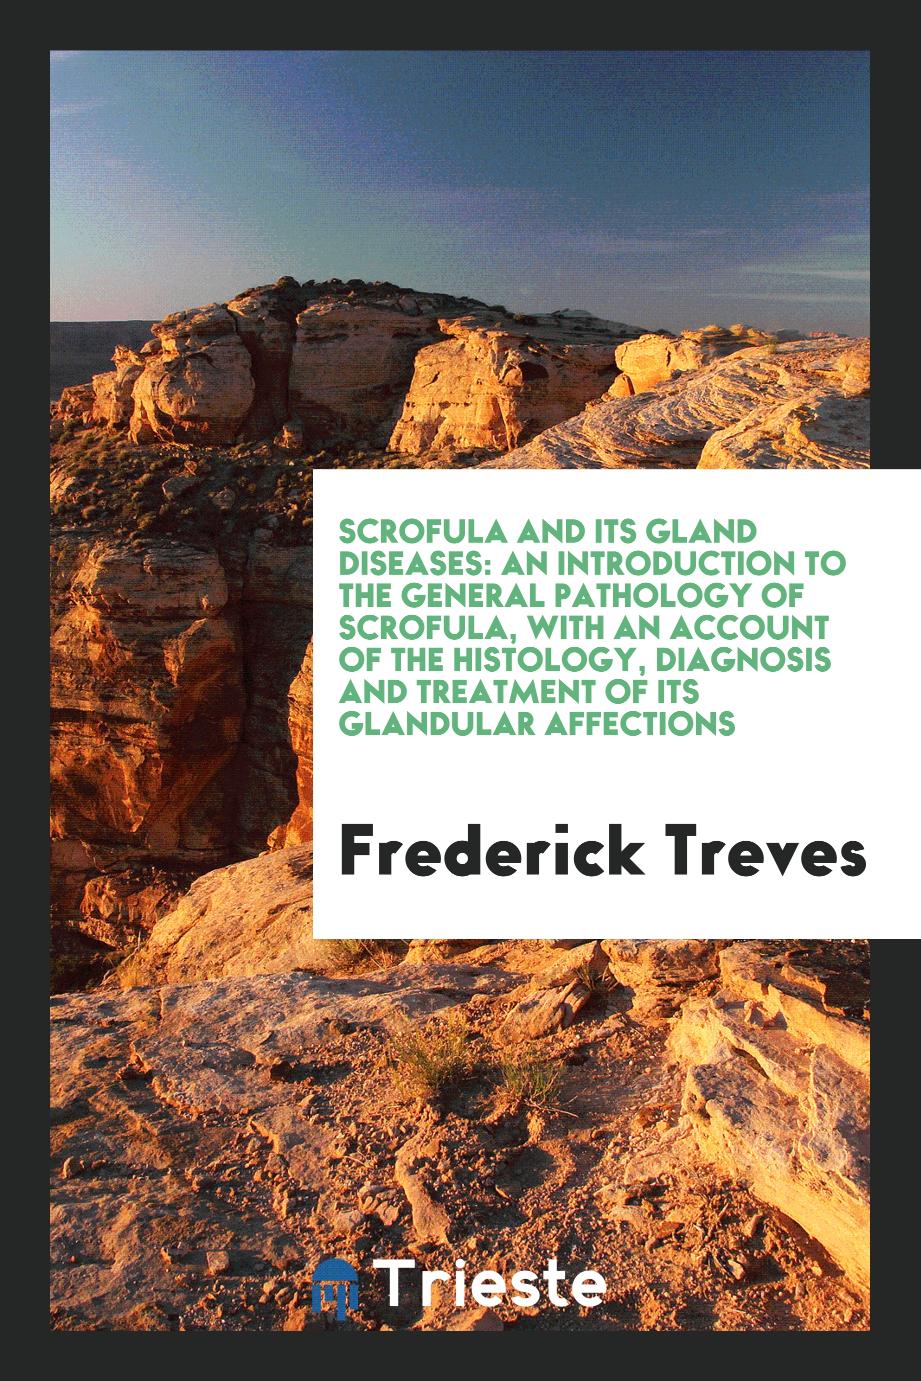 Scrofula and Its Gland Diseases: An Introduction to the General Pathology of Scrofula, with an Account of the Histology, Diagnosis and Treatment of Its Glandular Affections